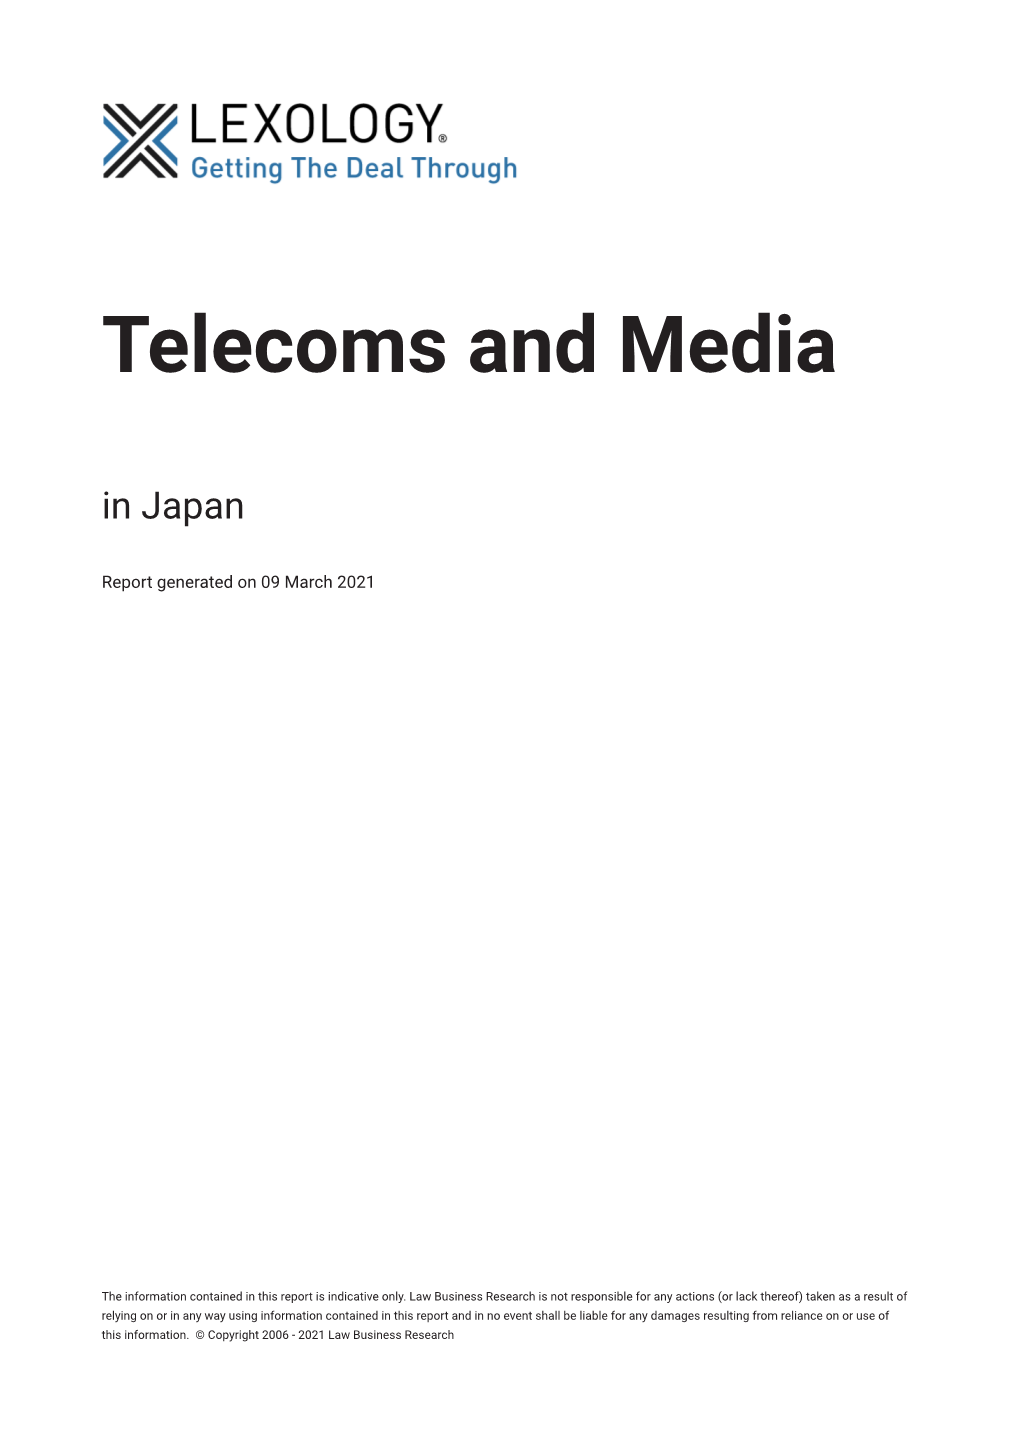 Telecoms and Media in Japan